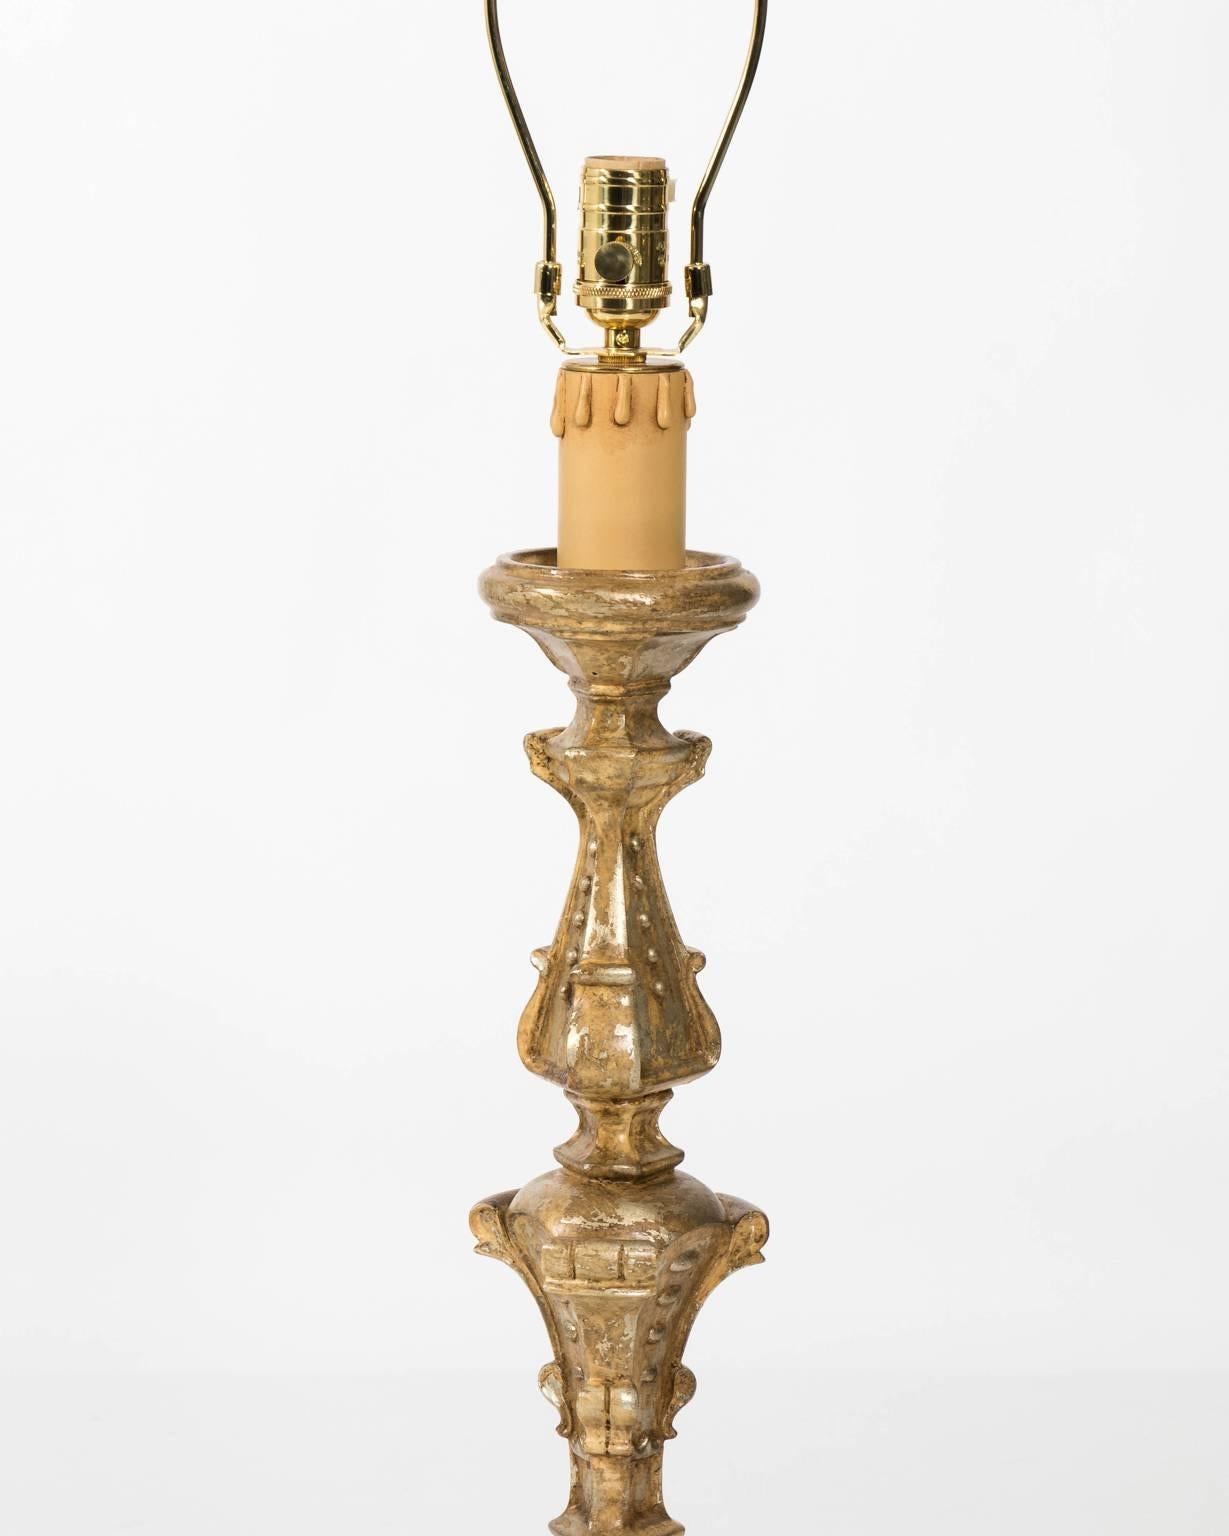 Pair of carved wood candlestick lamps in gold and silver gilt with new off white drum shades and finials, circa 1970s.